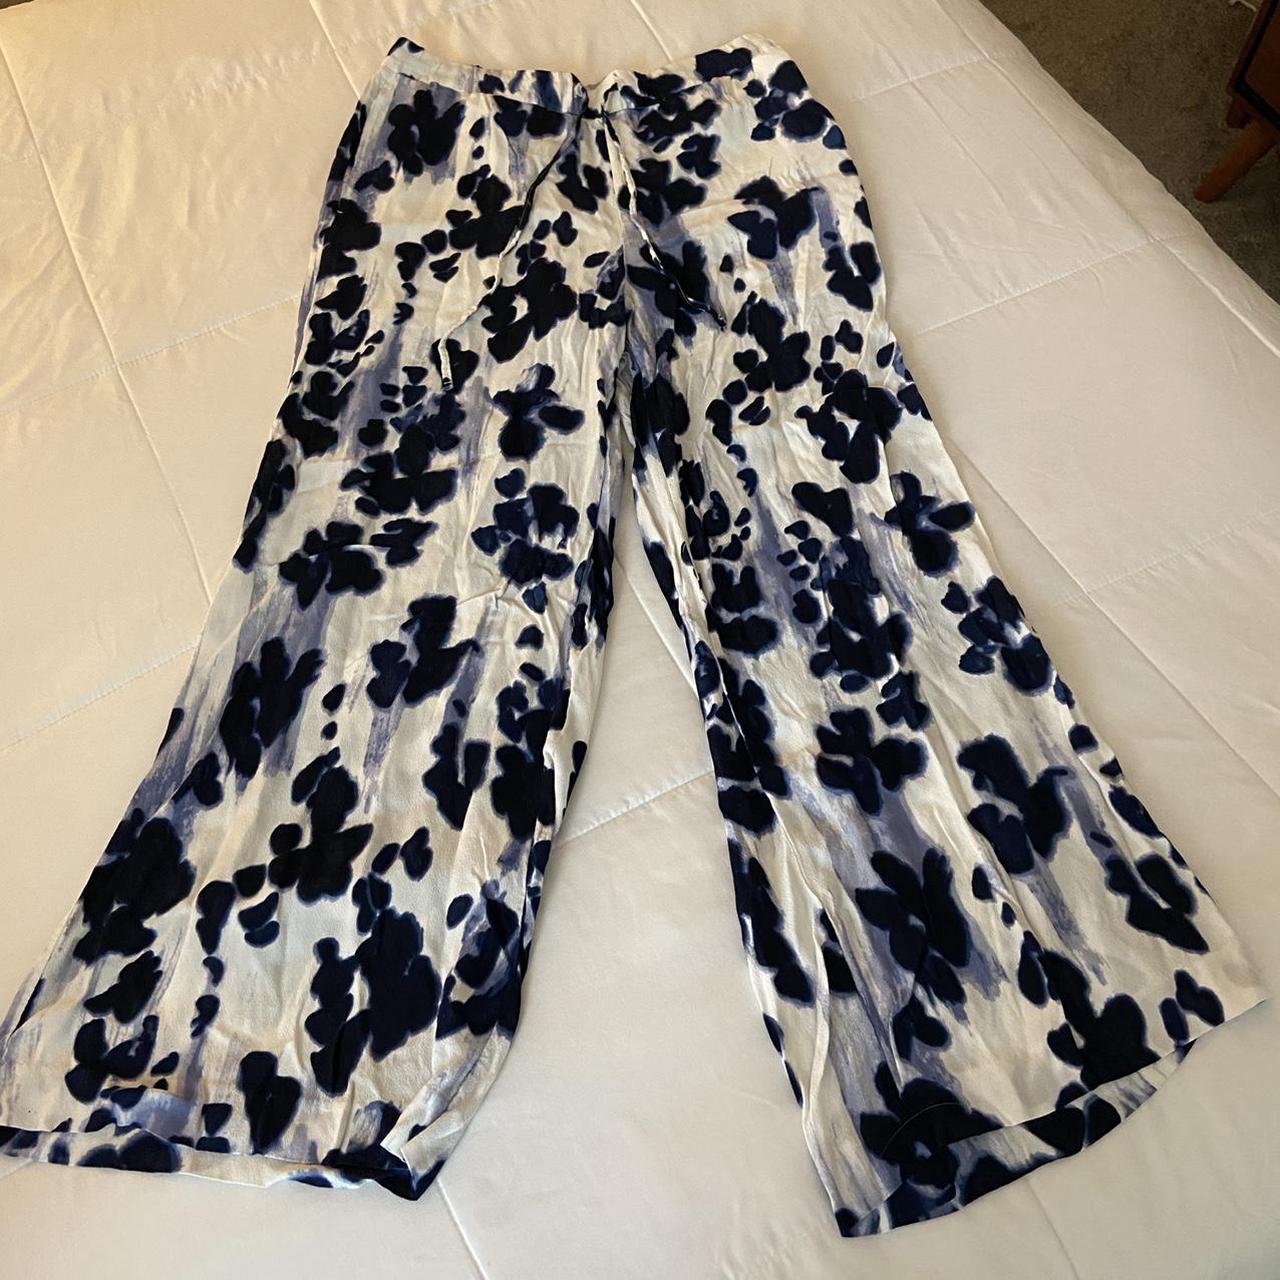 Product Image 2 - White and Blue Flowy Pants

From